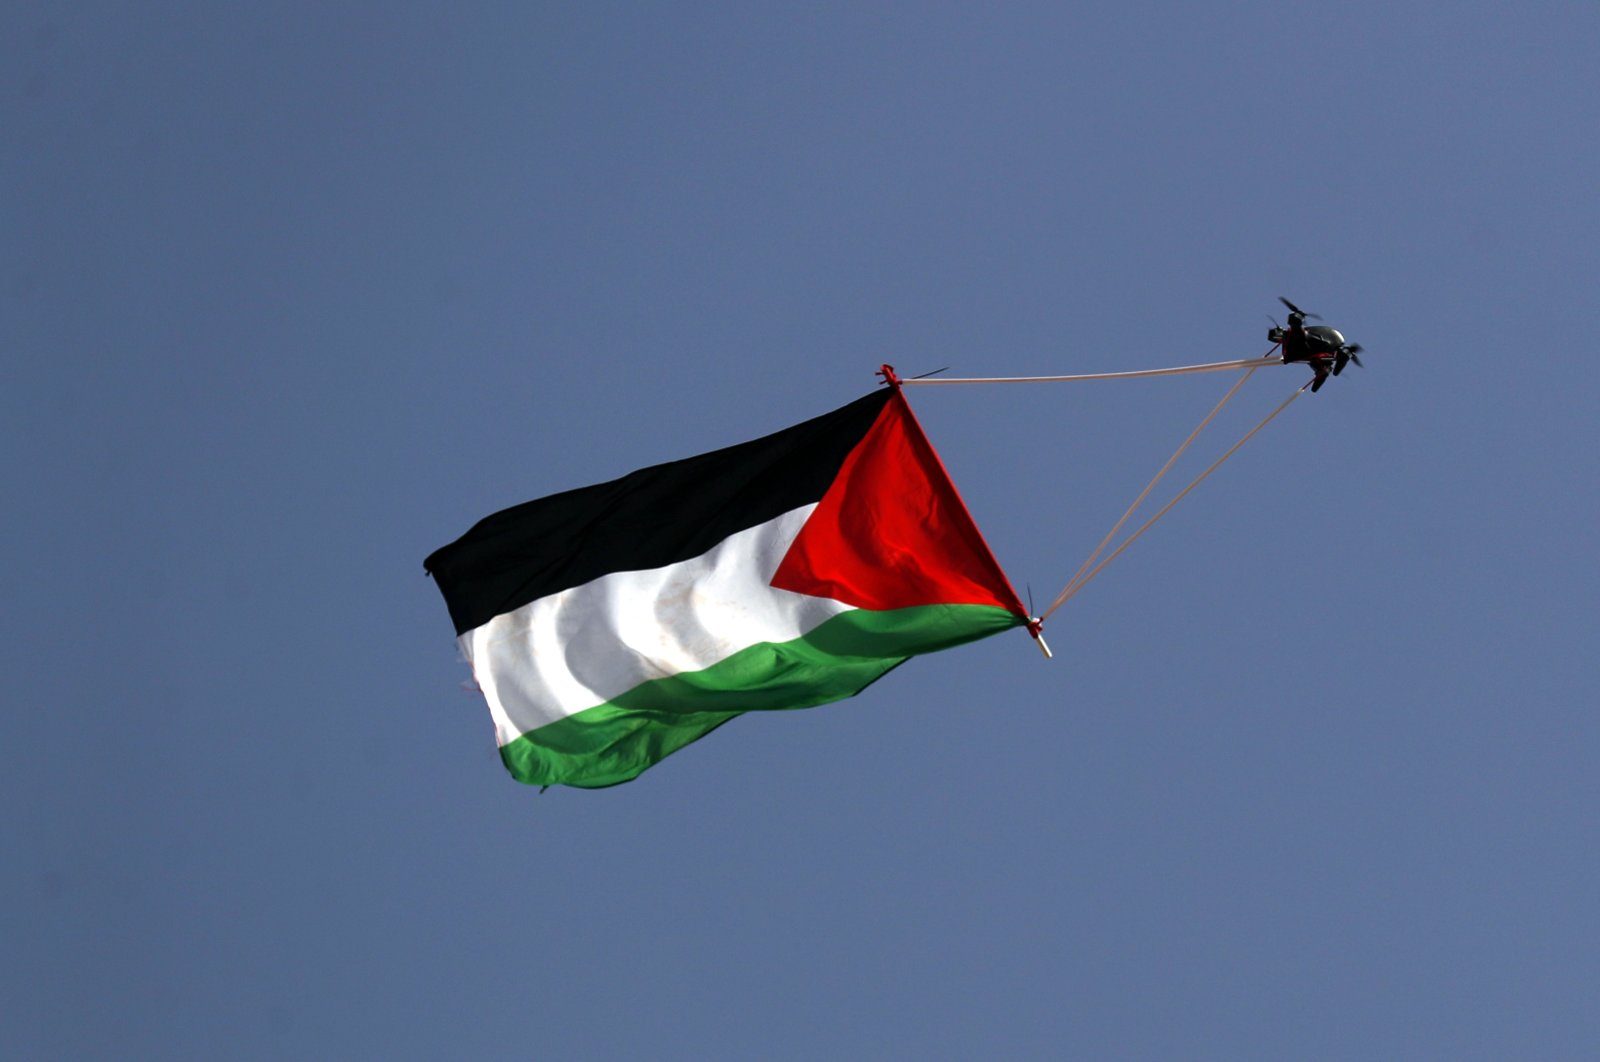 A drone carrying a Palestinian flag flies over the walls of Jerusalem&#039;s Old City, during the Israeli right-wing &quot;Flag March&quot; next to the Damascus gate in occupied East Jerusalem, Palestine, May 29, 2022. (EPA Photo)